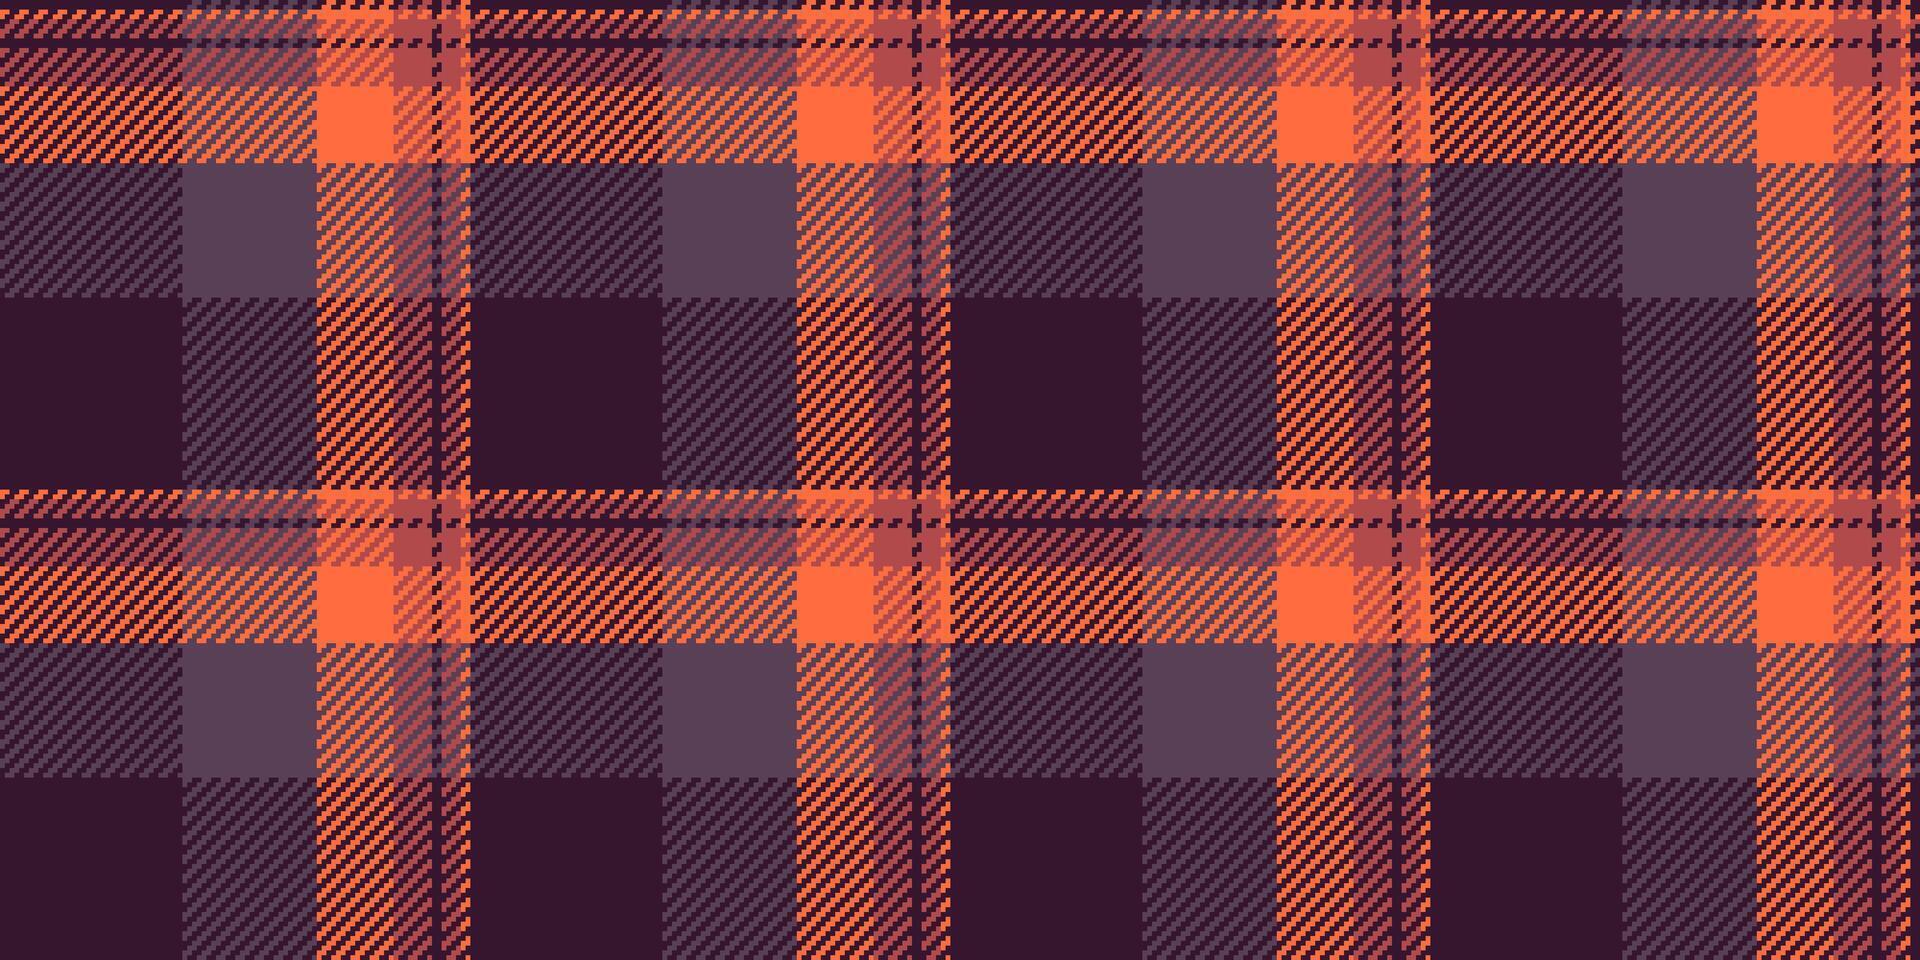 List fabric check texture, faded textile vector tartan. Multicolored pattern seamless background plaid in red and dark colors.